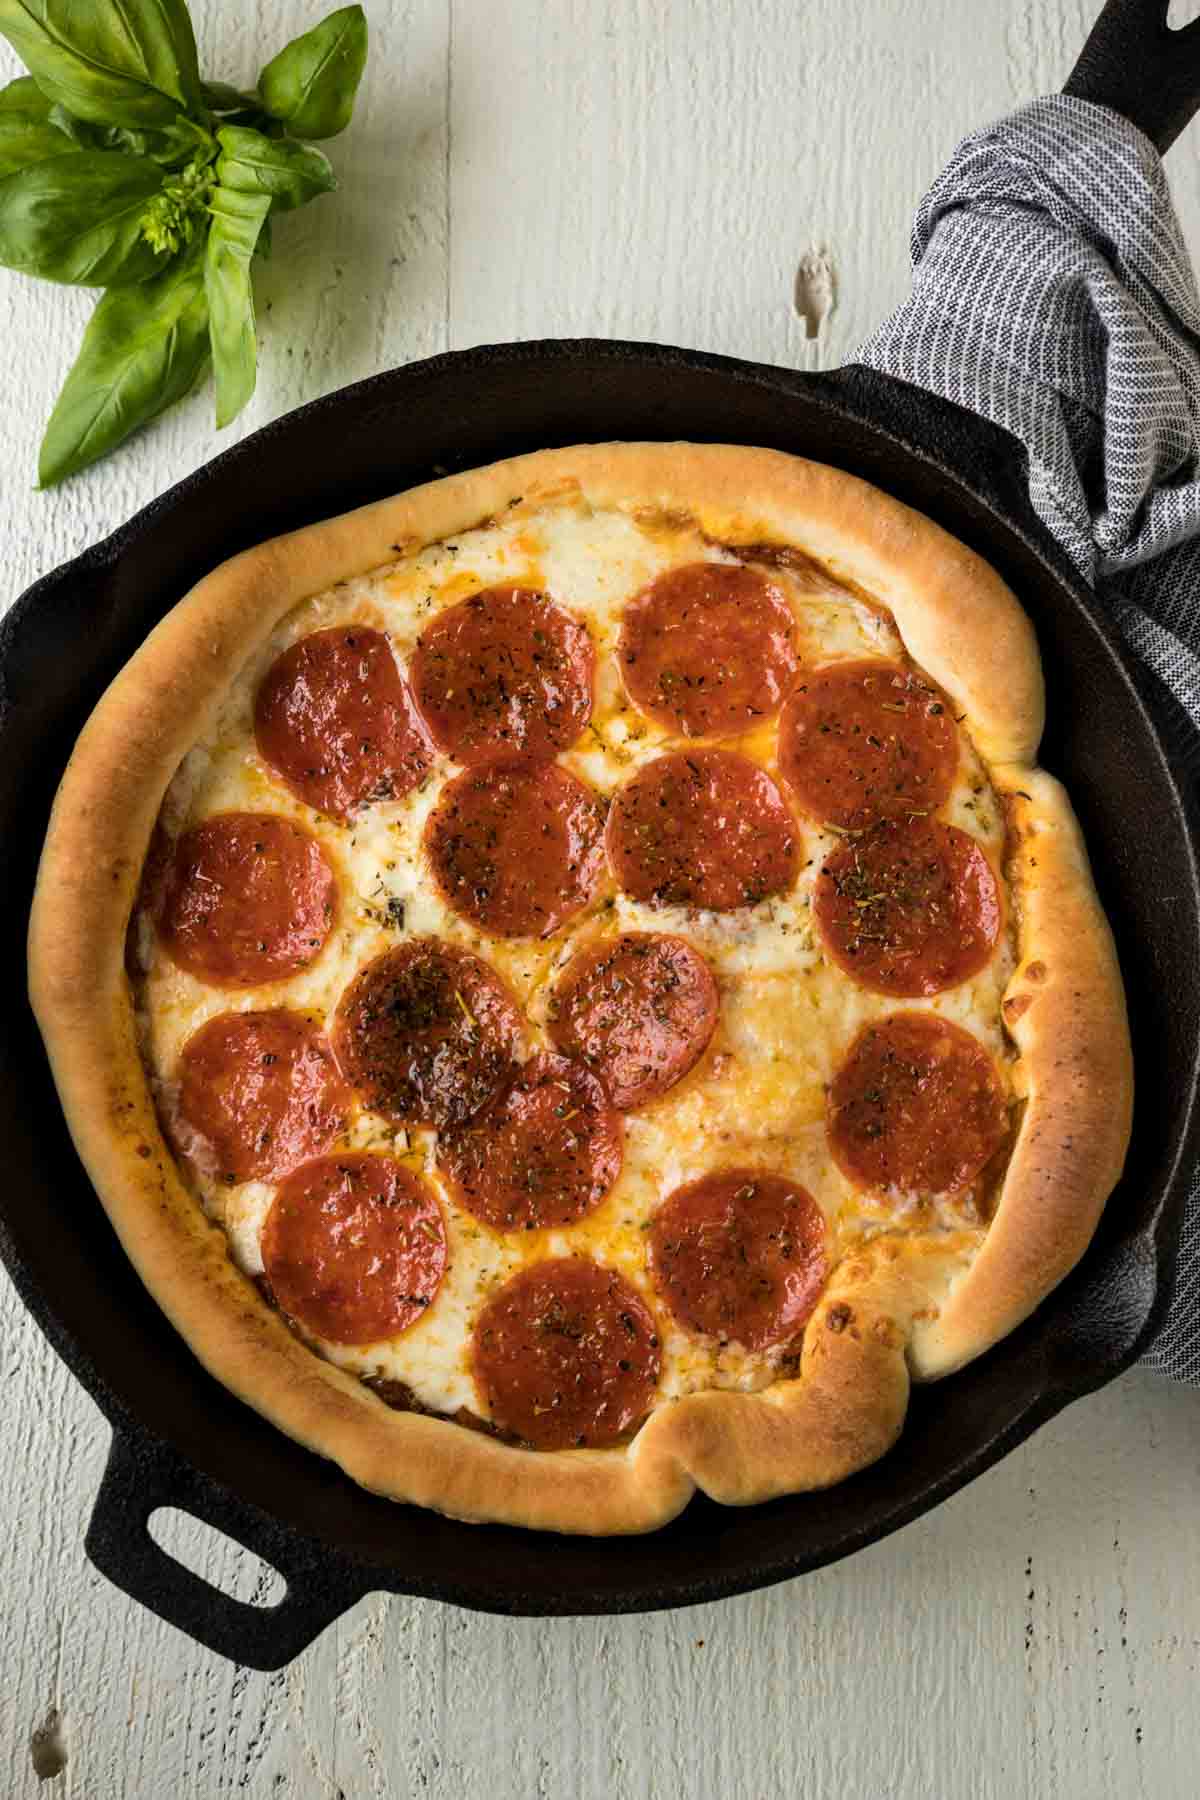 Cast iron skillet pizza with pepperoni and cheese.